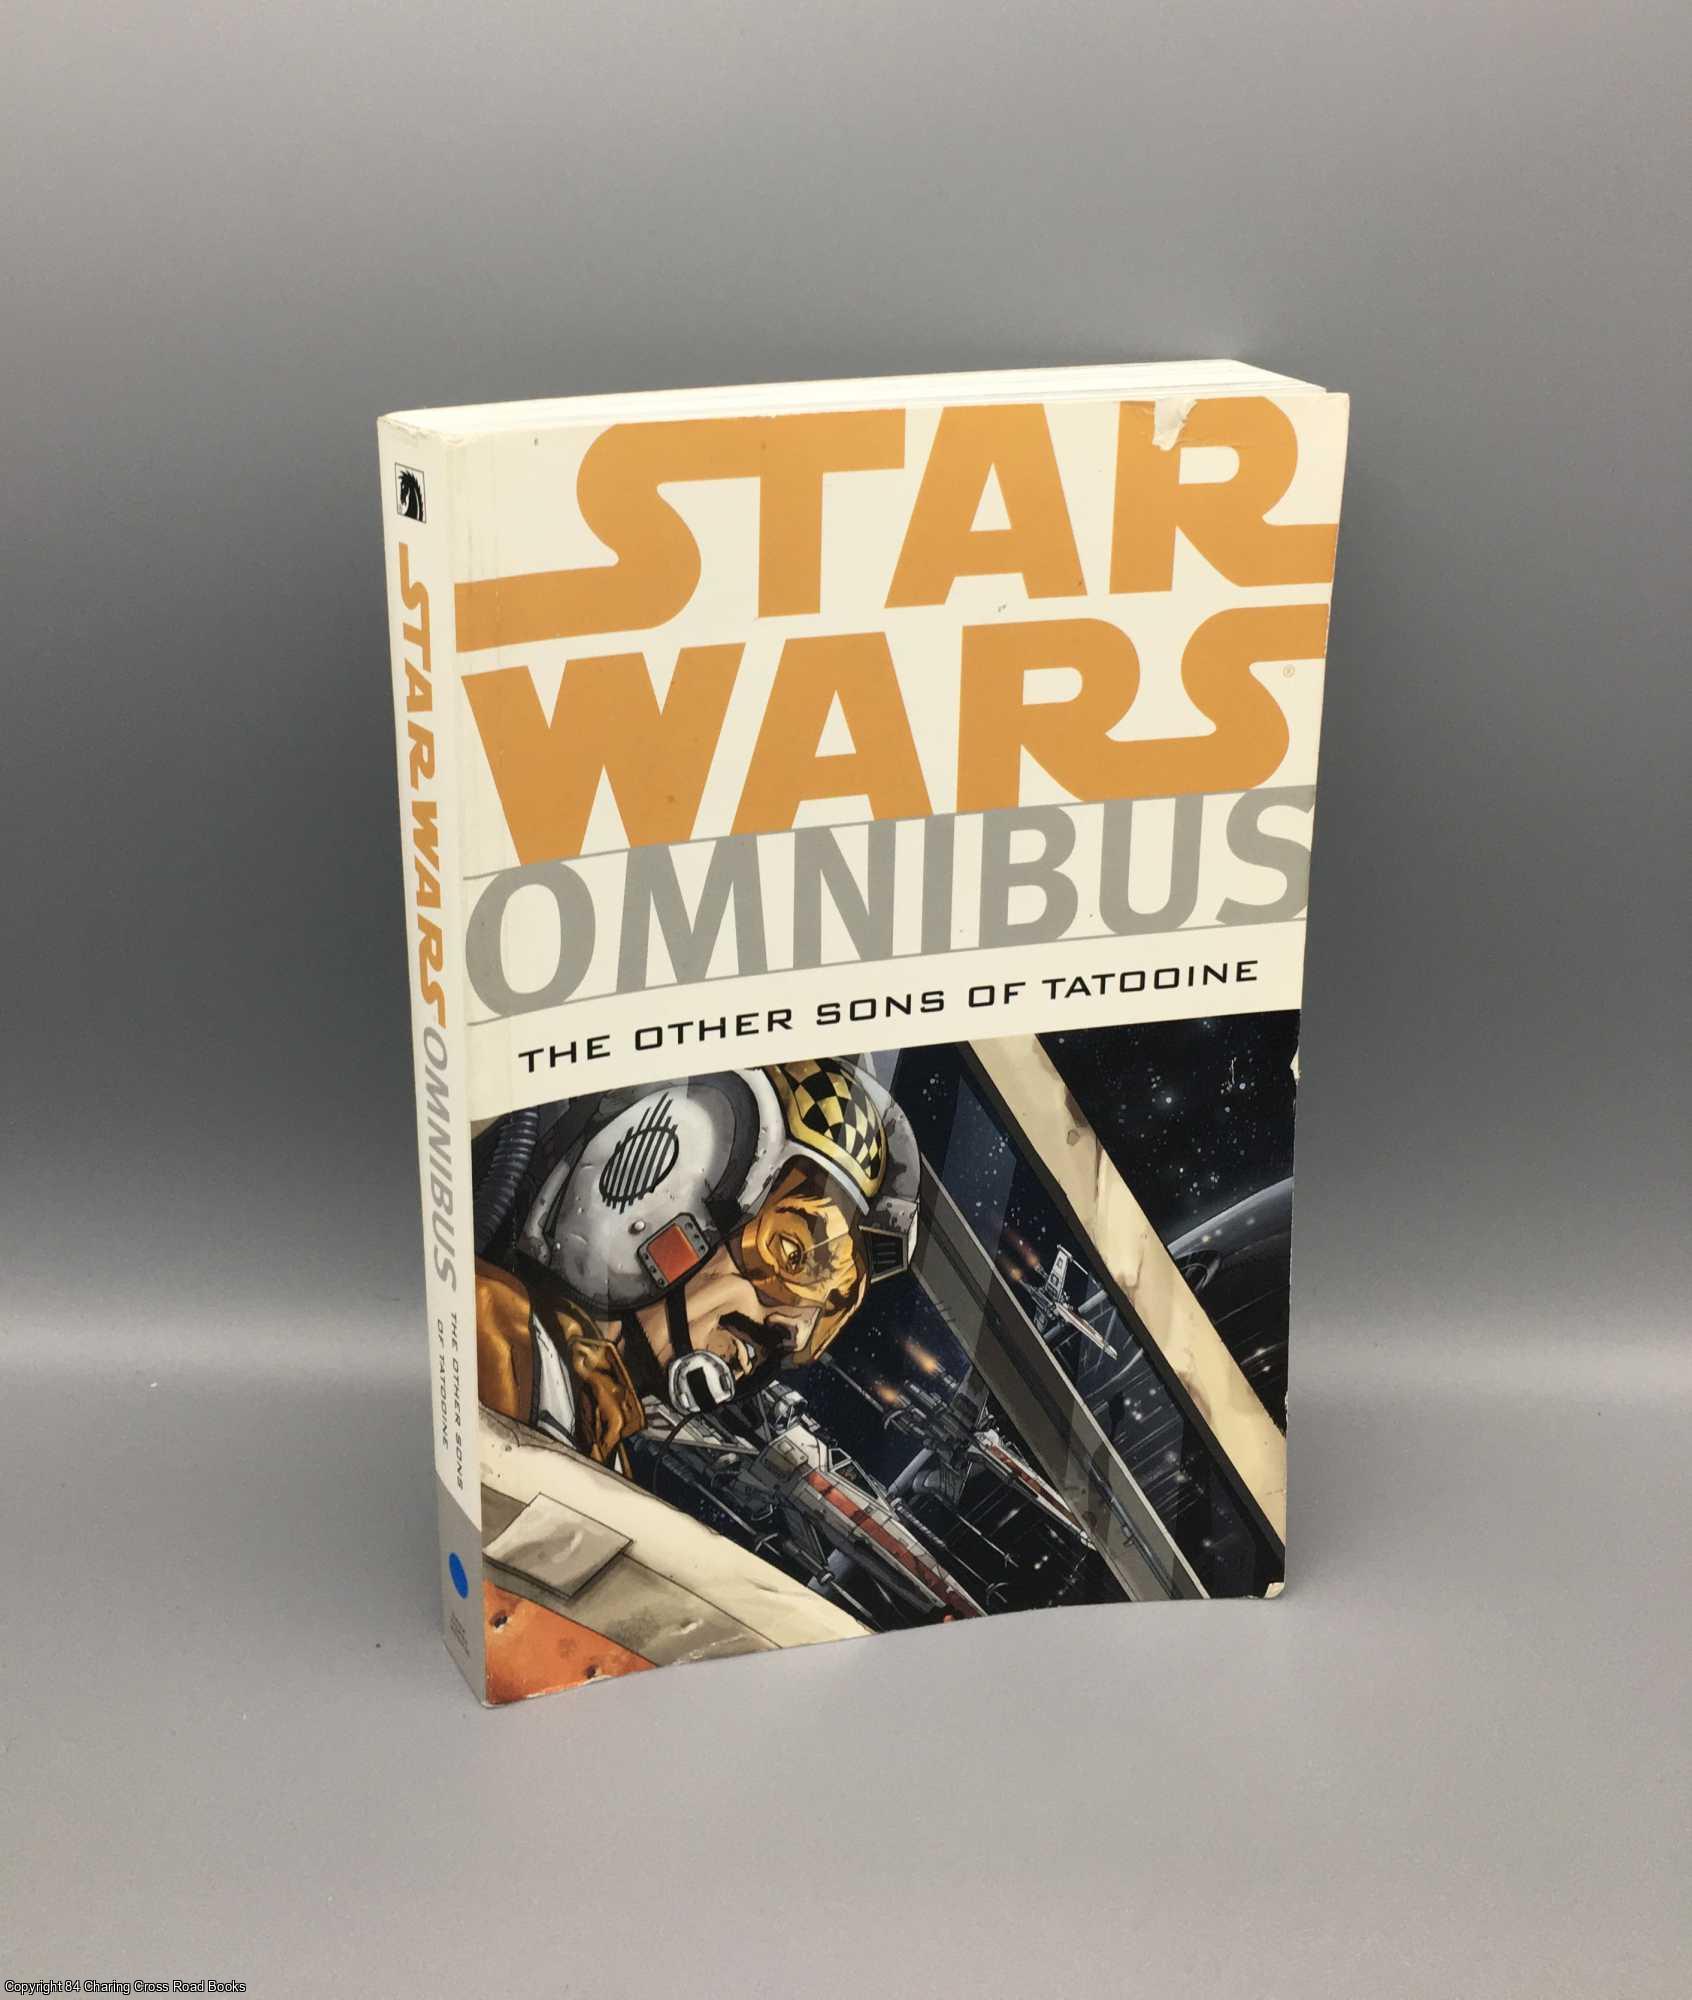 Barr; Erskine - Star Wars Omnibus - The Other Sons of Tatooine